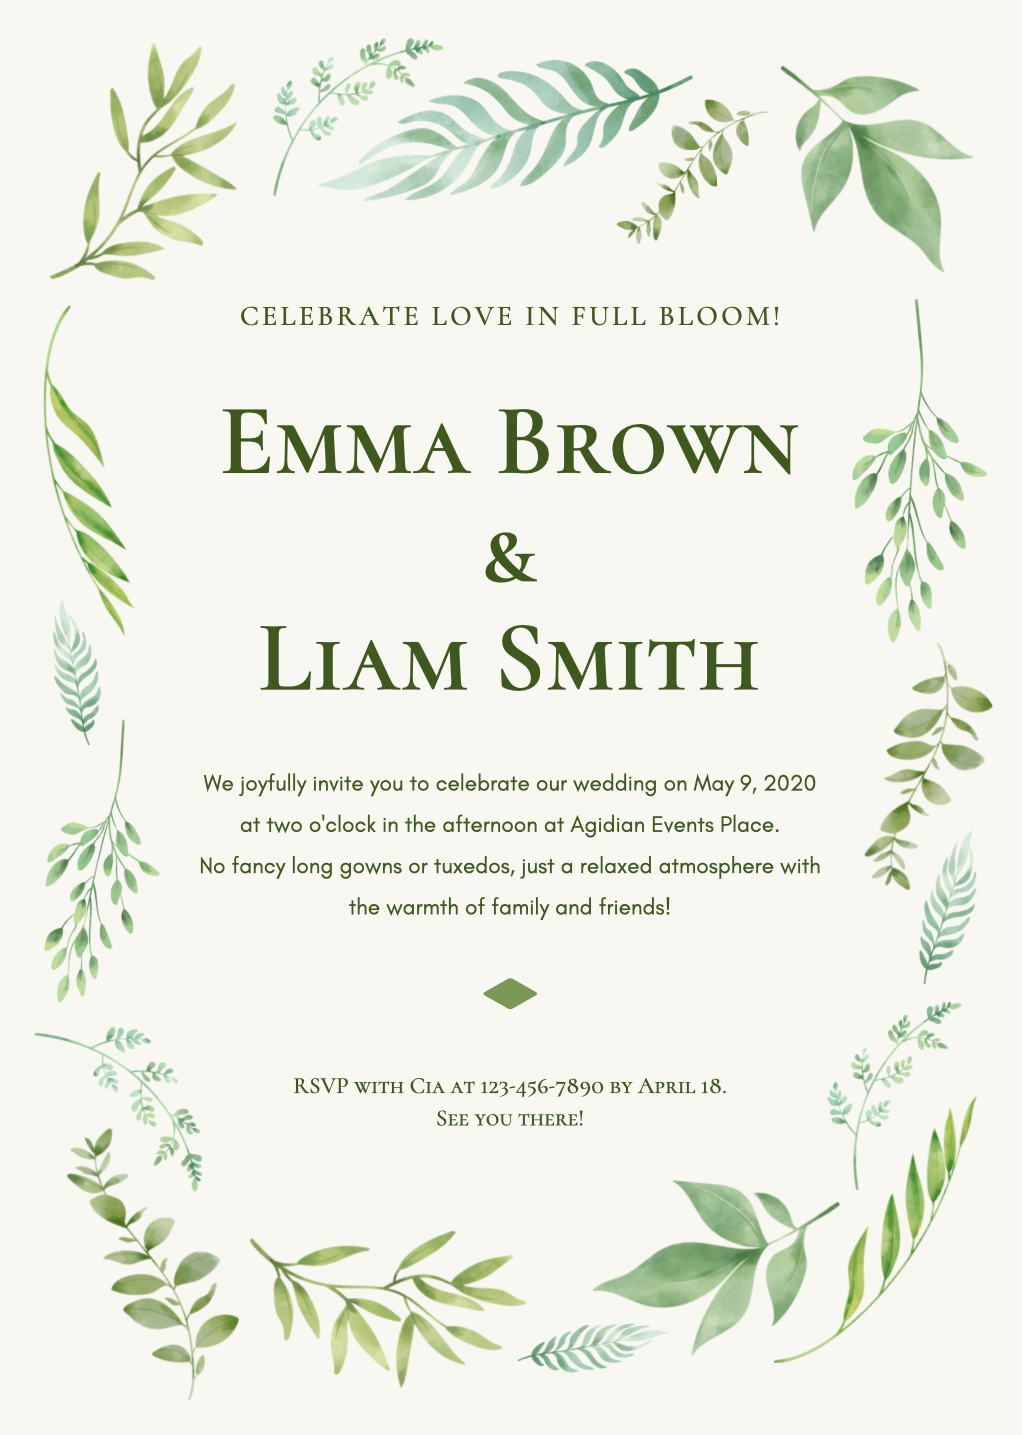  Green and white wedding invitation with greenery design